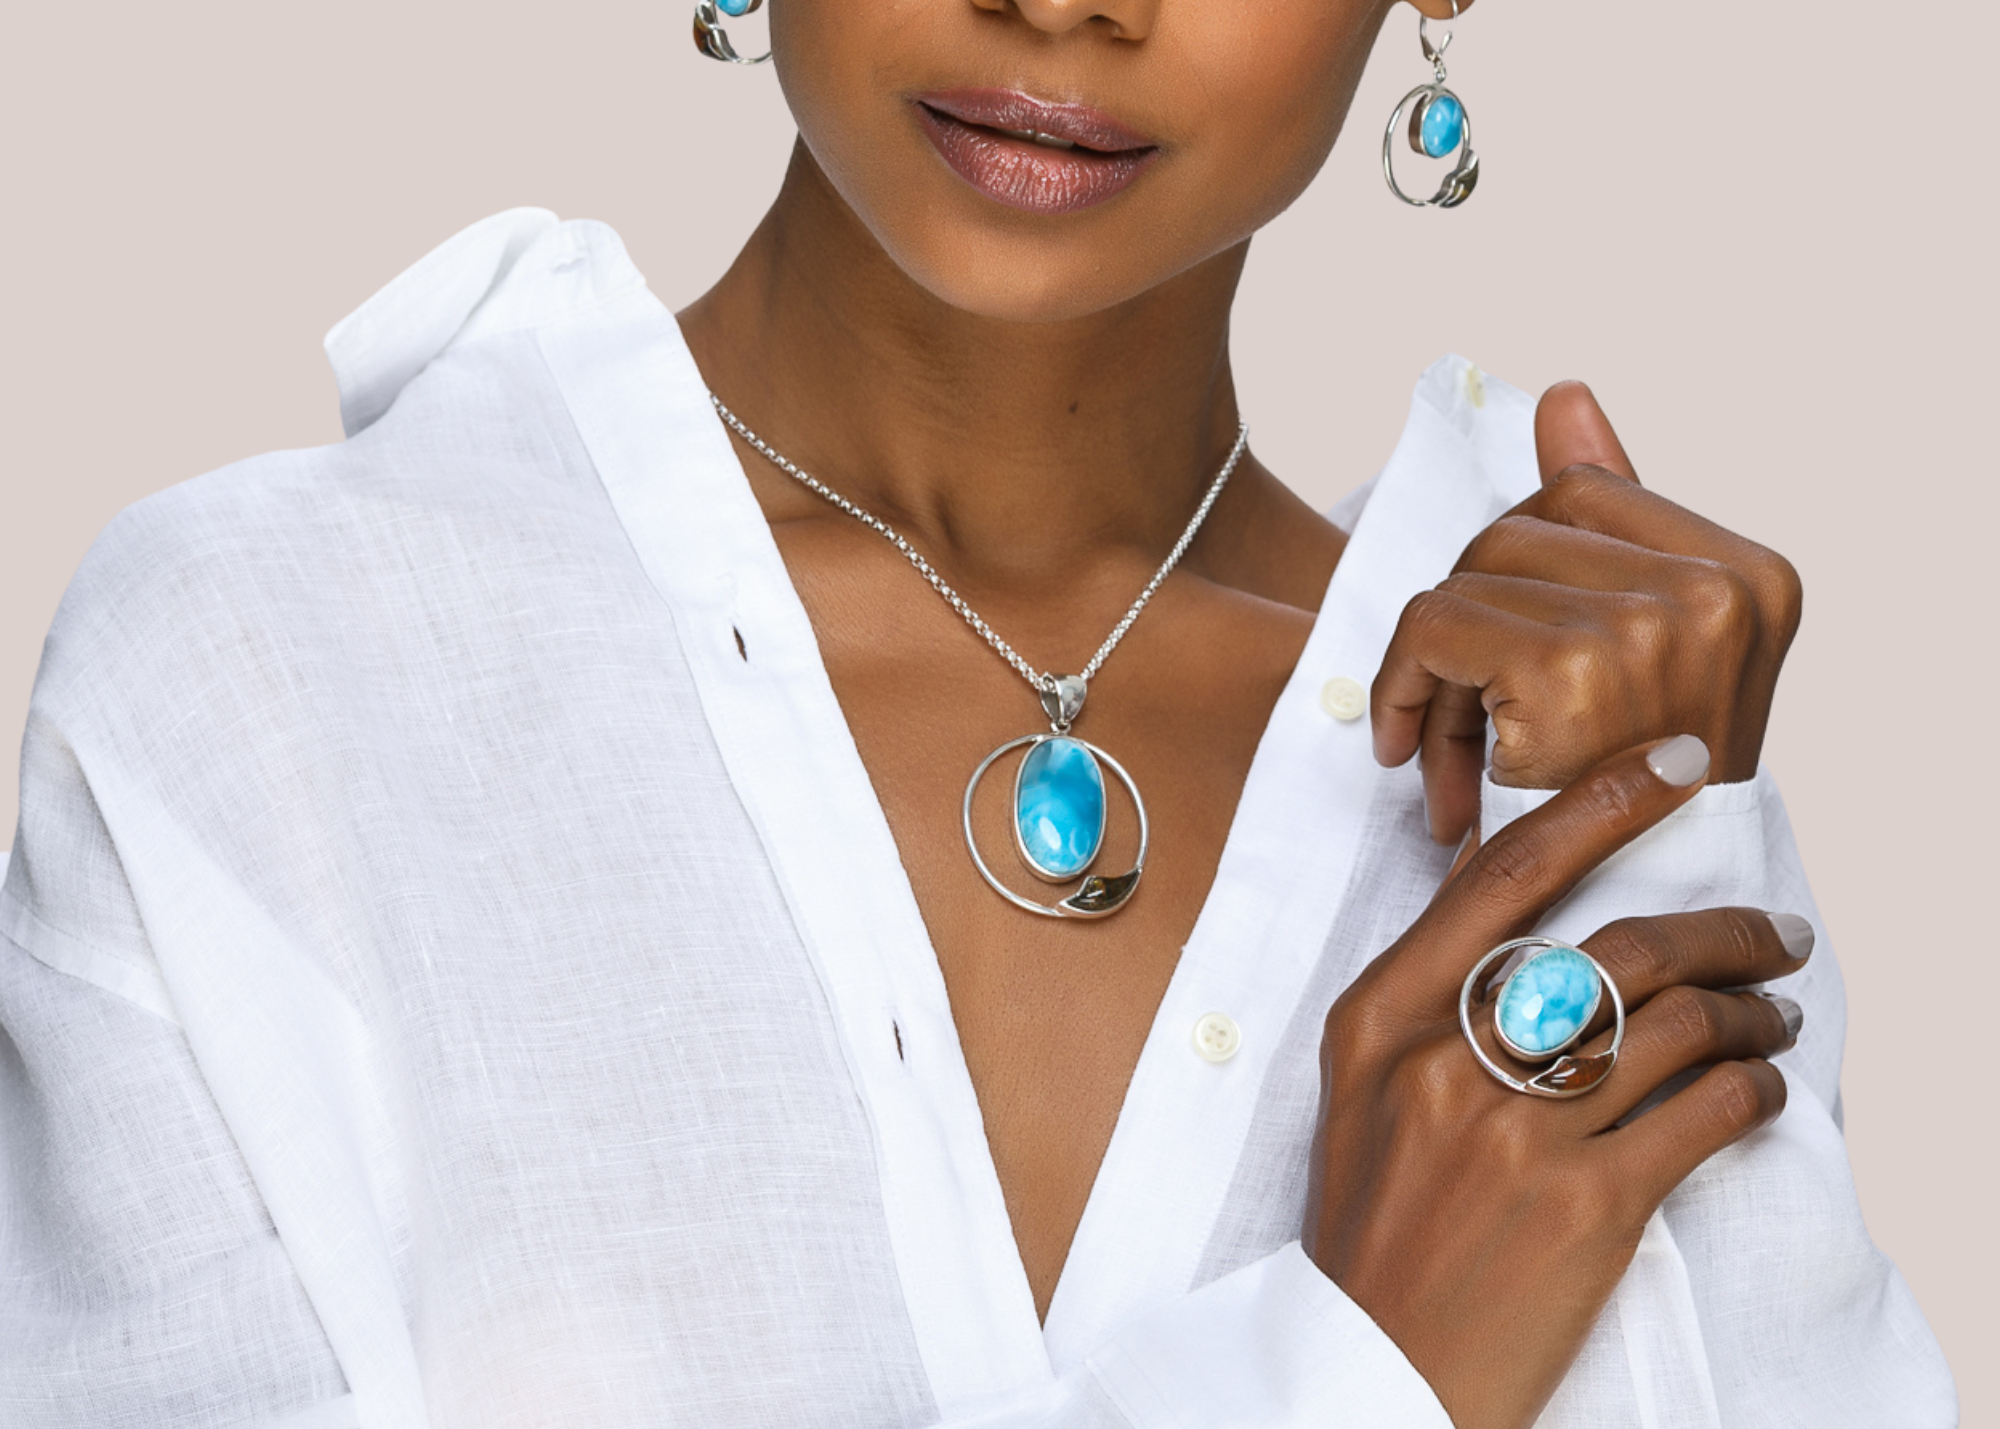 Mar & Tierra collection is made of beautiful blue Larimar stones and Dominican Amber.